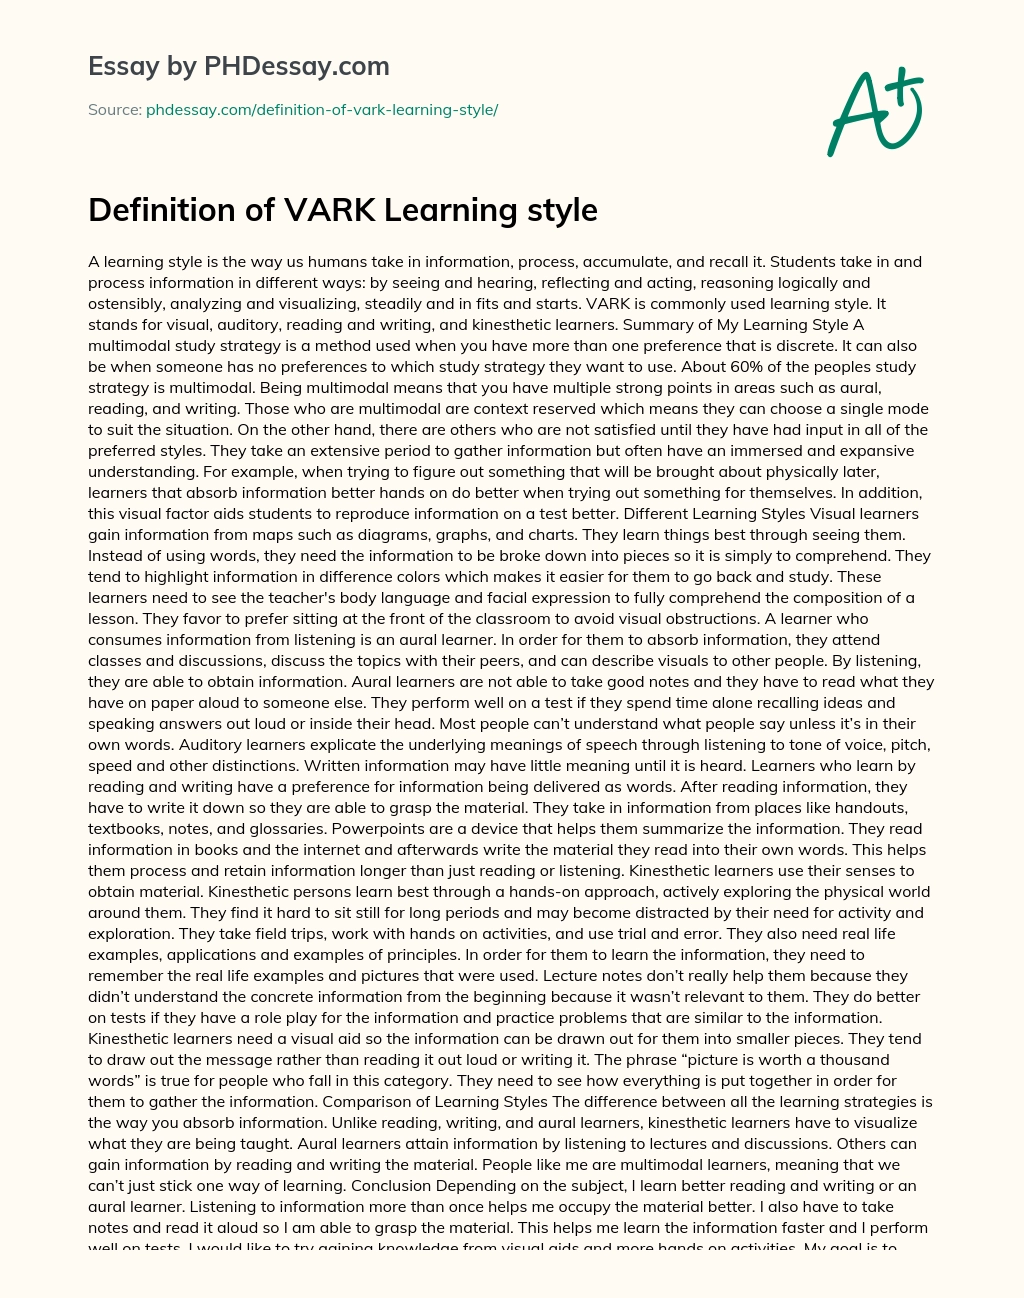 Definition of VARK Learning style essay